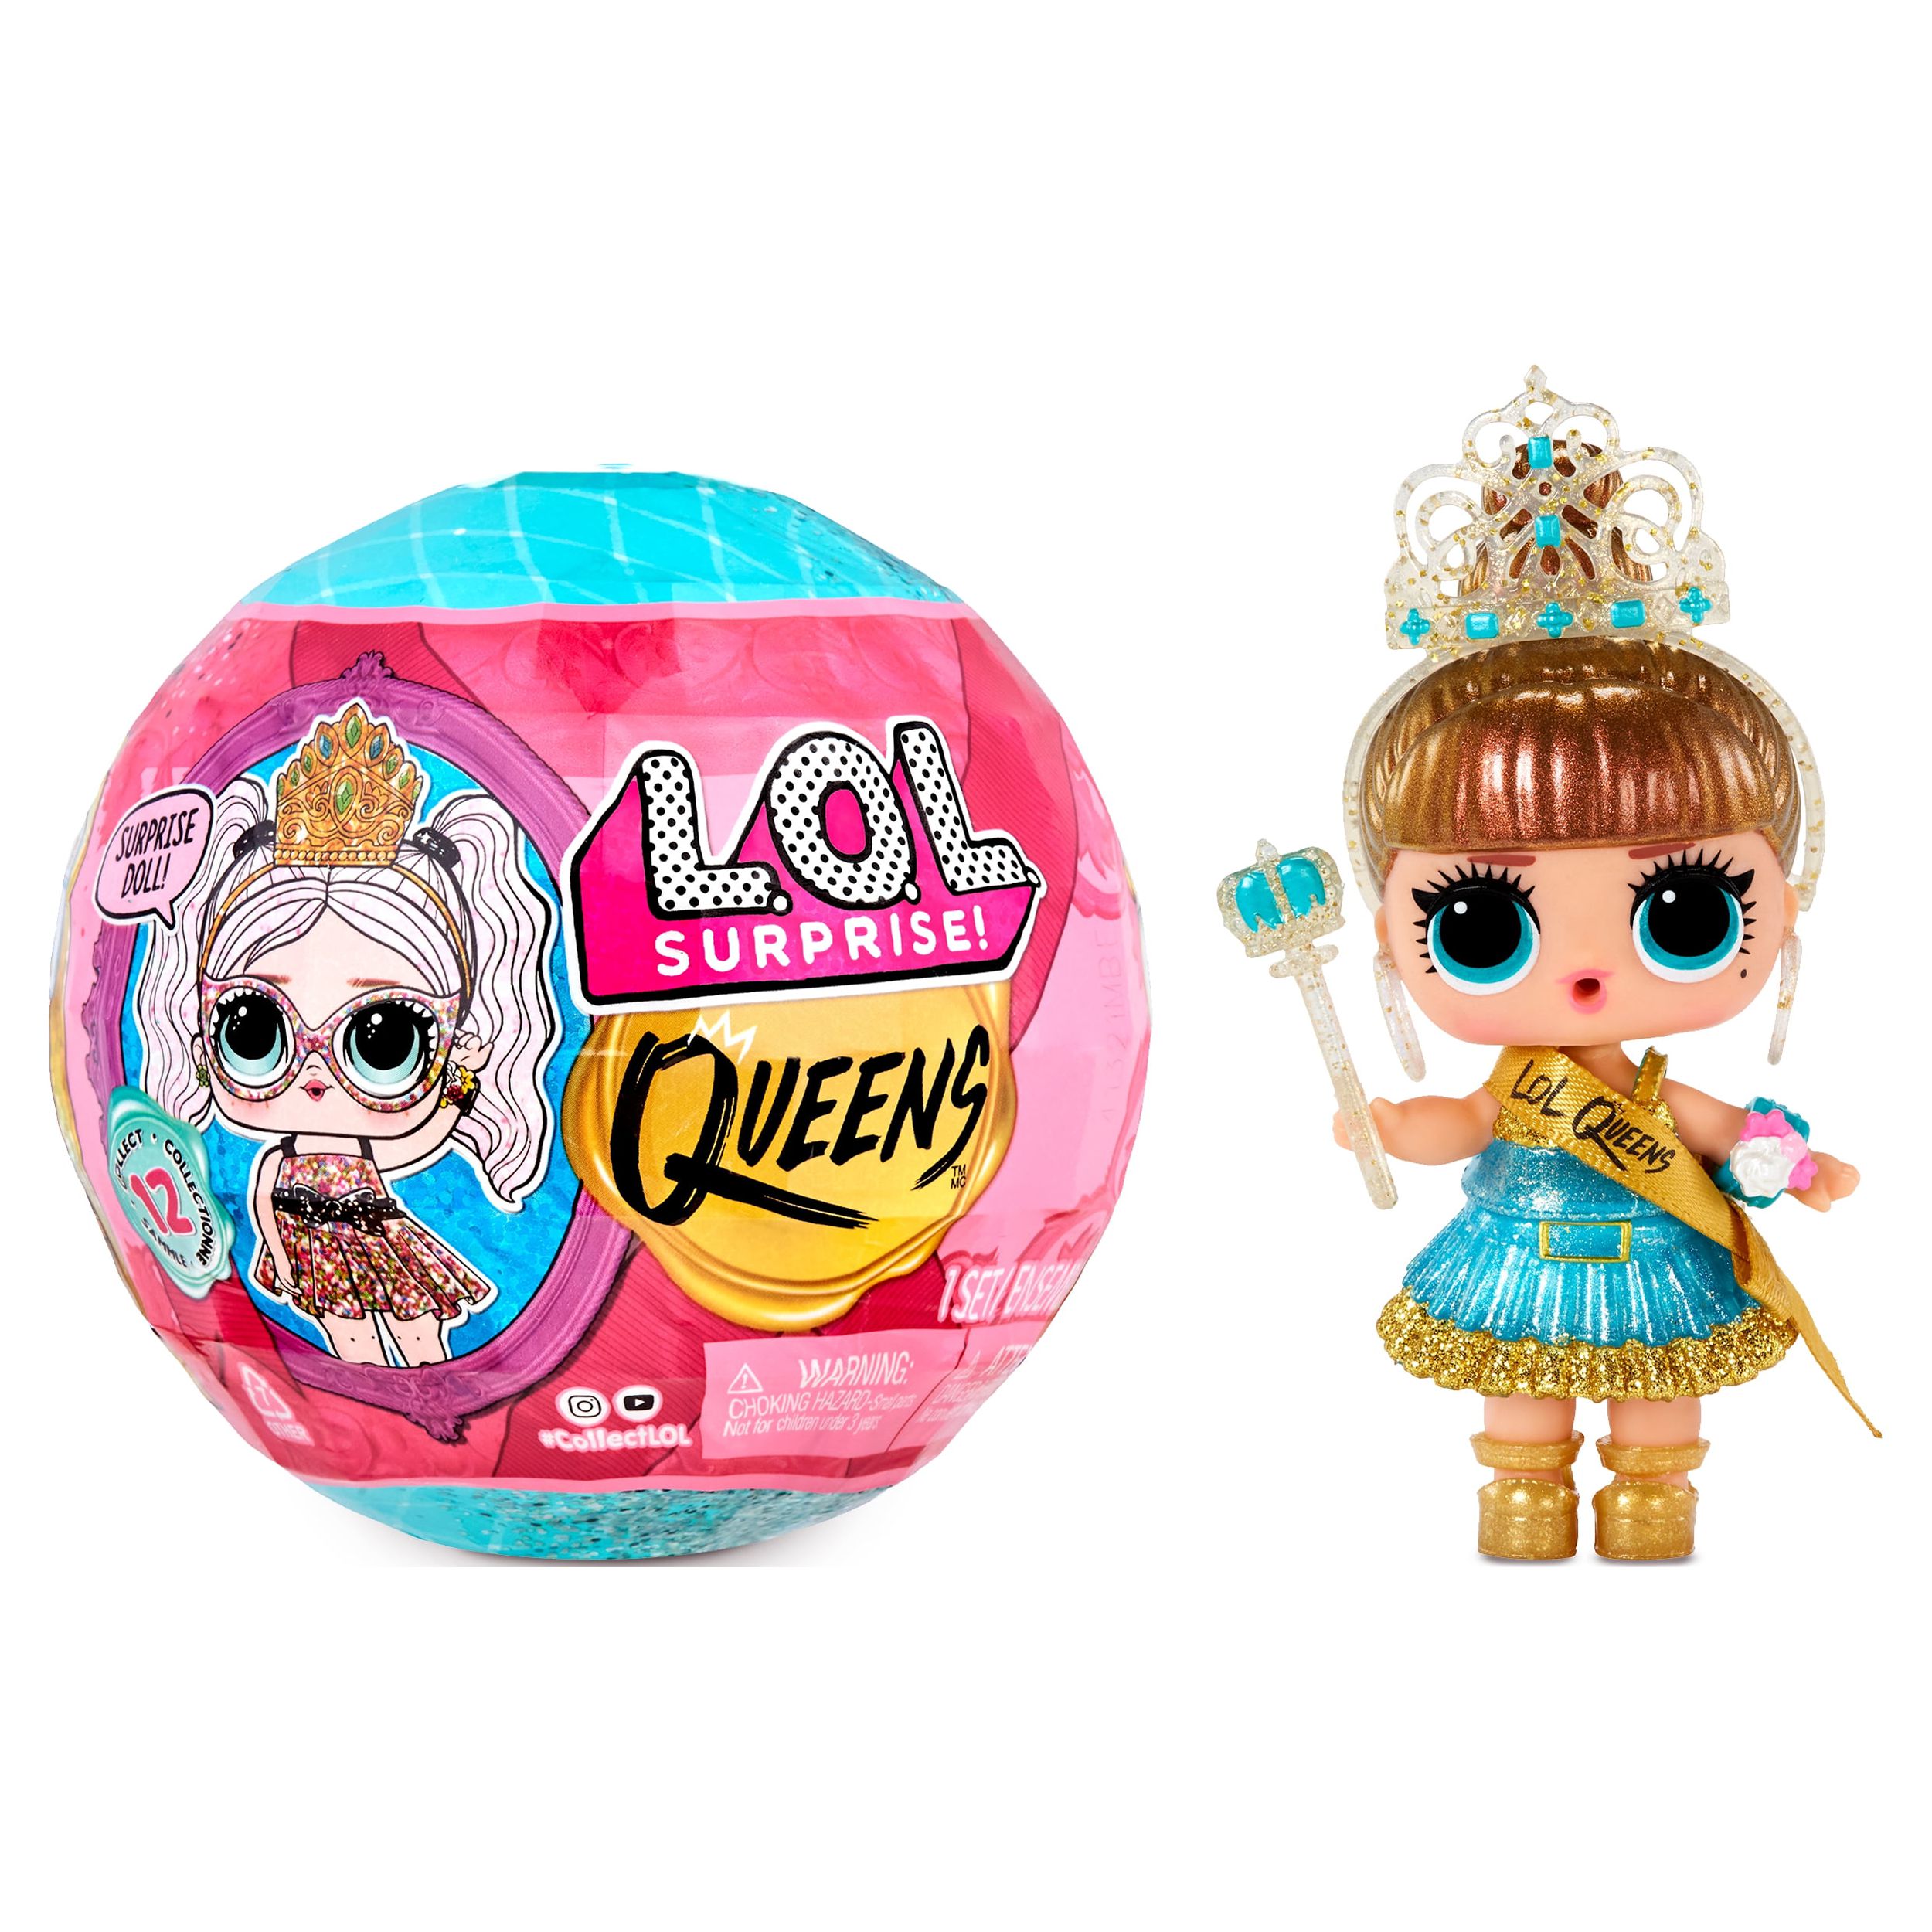 lol surprise queens dolls with 9 surprises including doll, fashions, and royal themed accessories - great gift for girls age 4+ - image 2 of 7